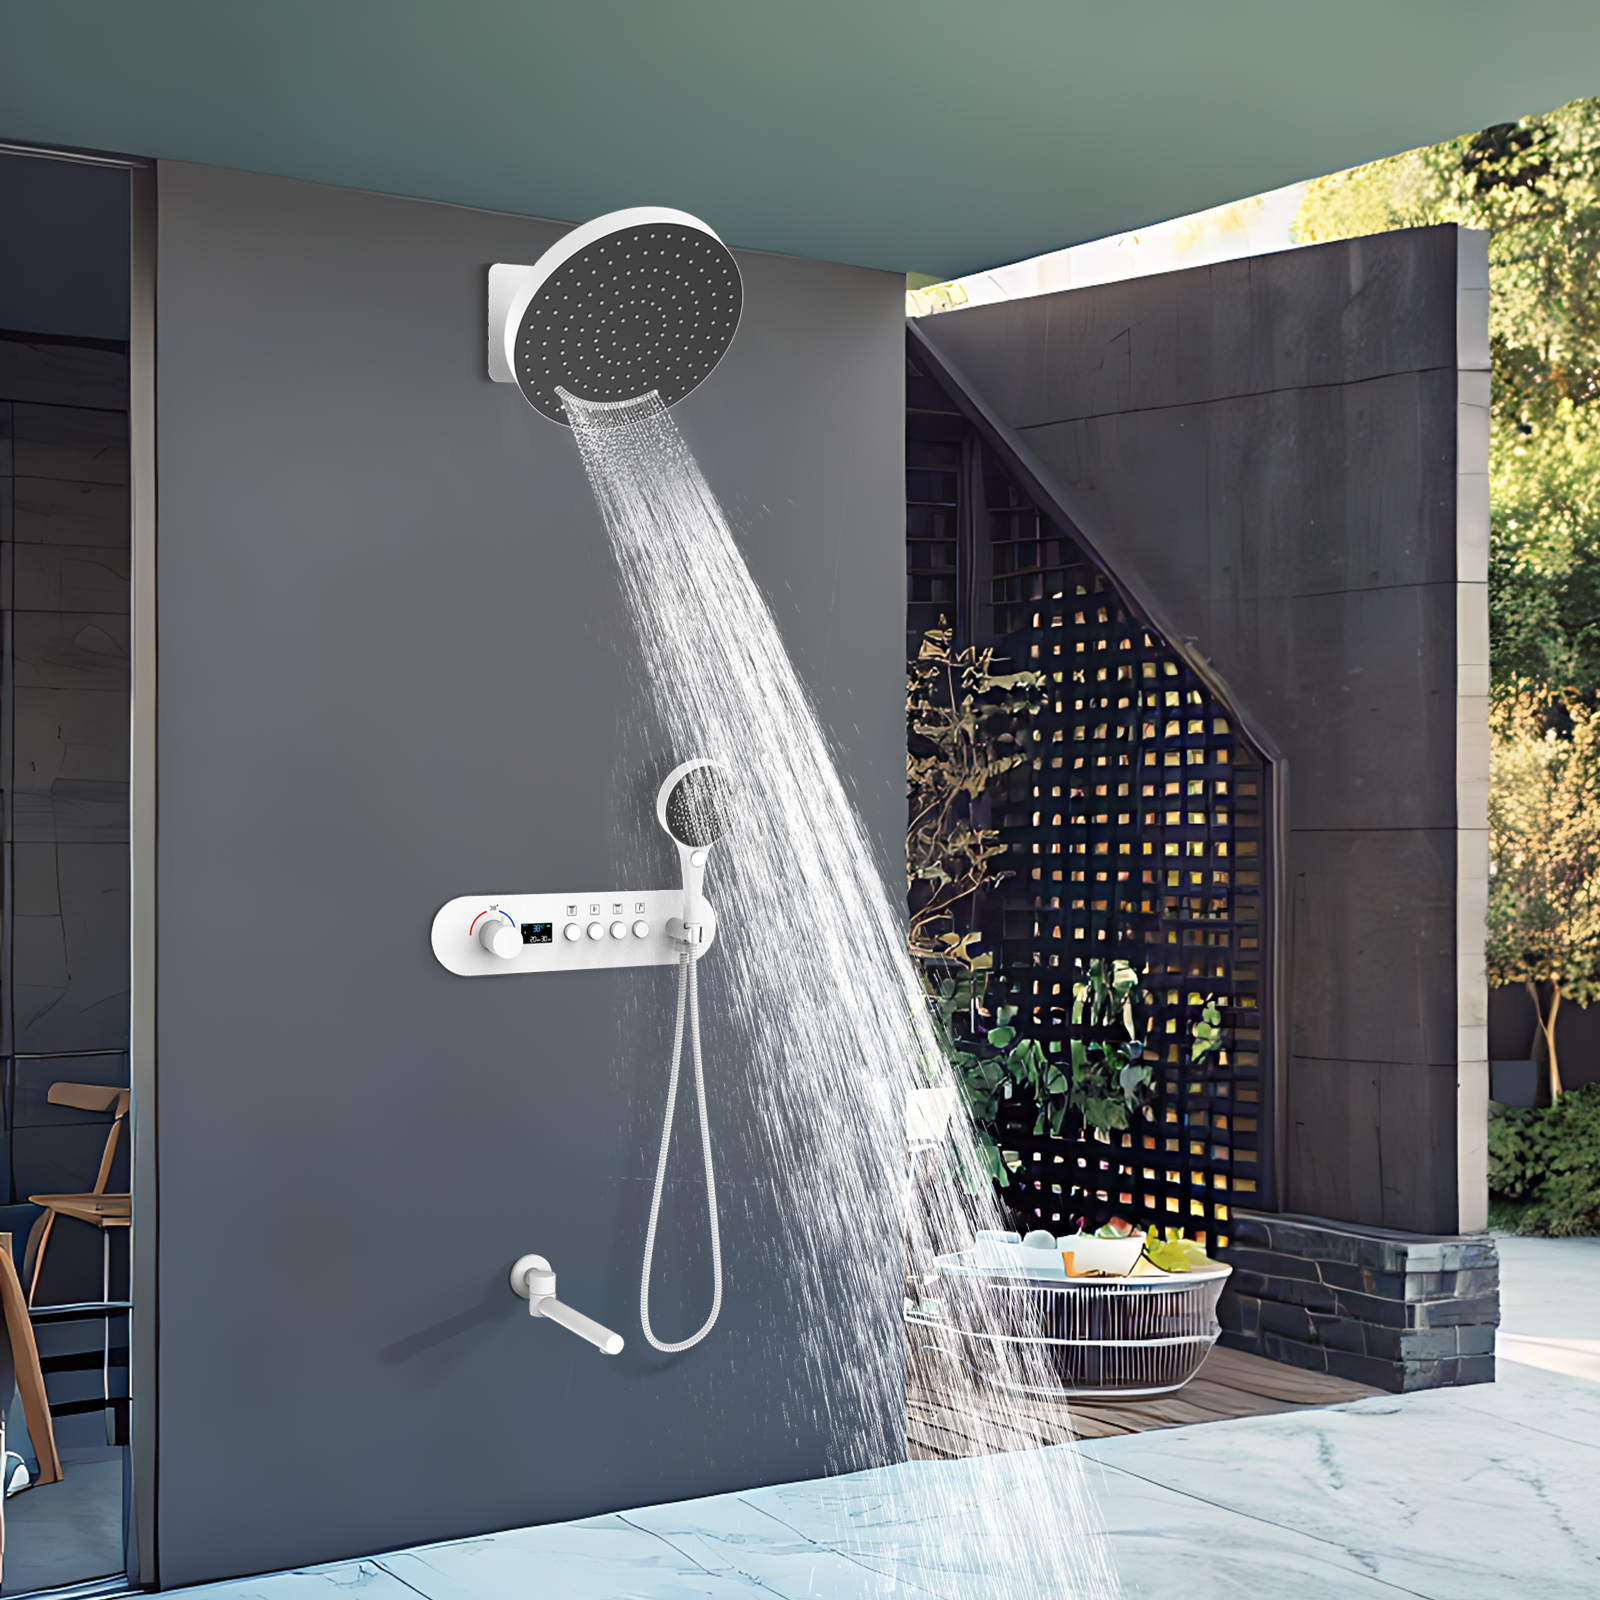 White Round Wall -mounted Rainfall And Constant Temperature Shower Mixing Valve Brings Down The Water Outlet